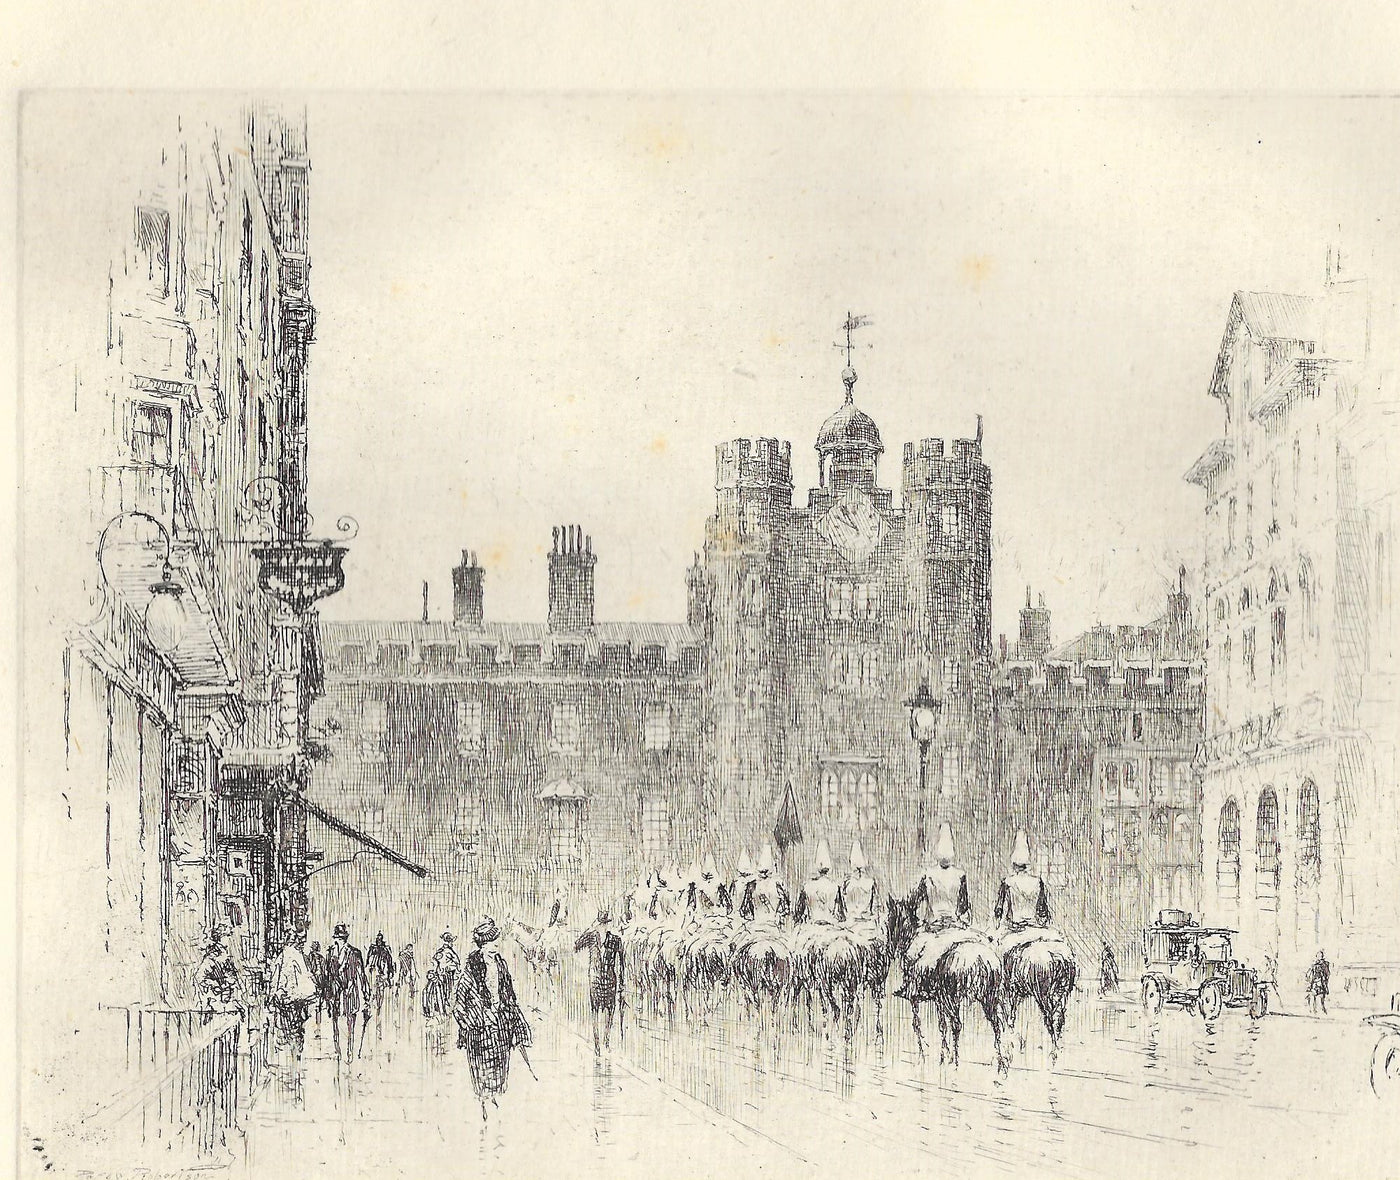 St James's Palace, London, Vintage etching by Percy Robertson. Published 1930.